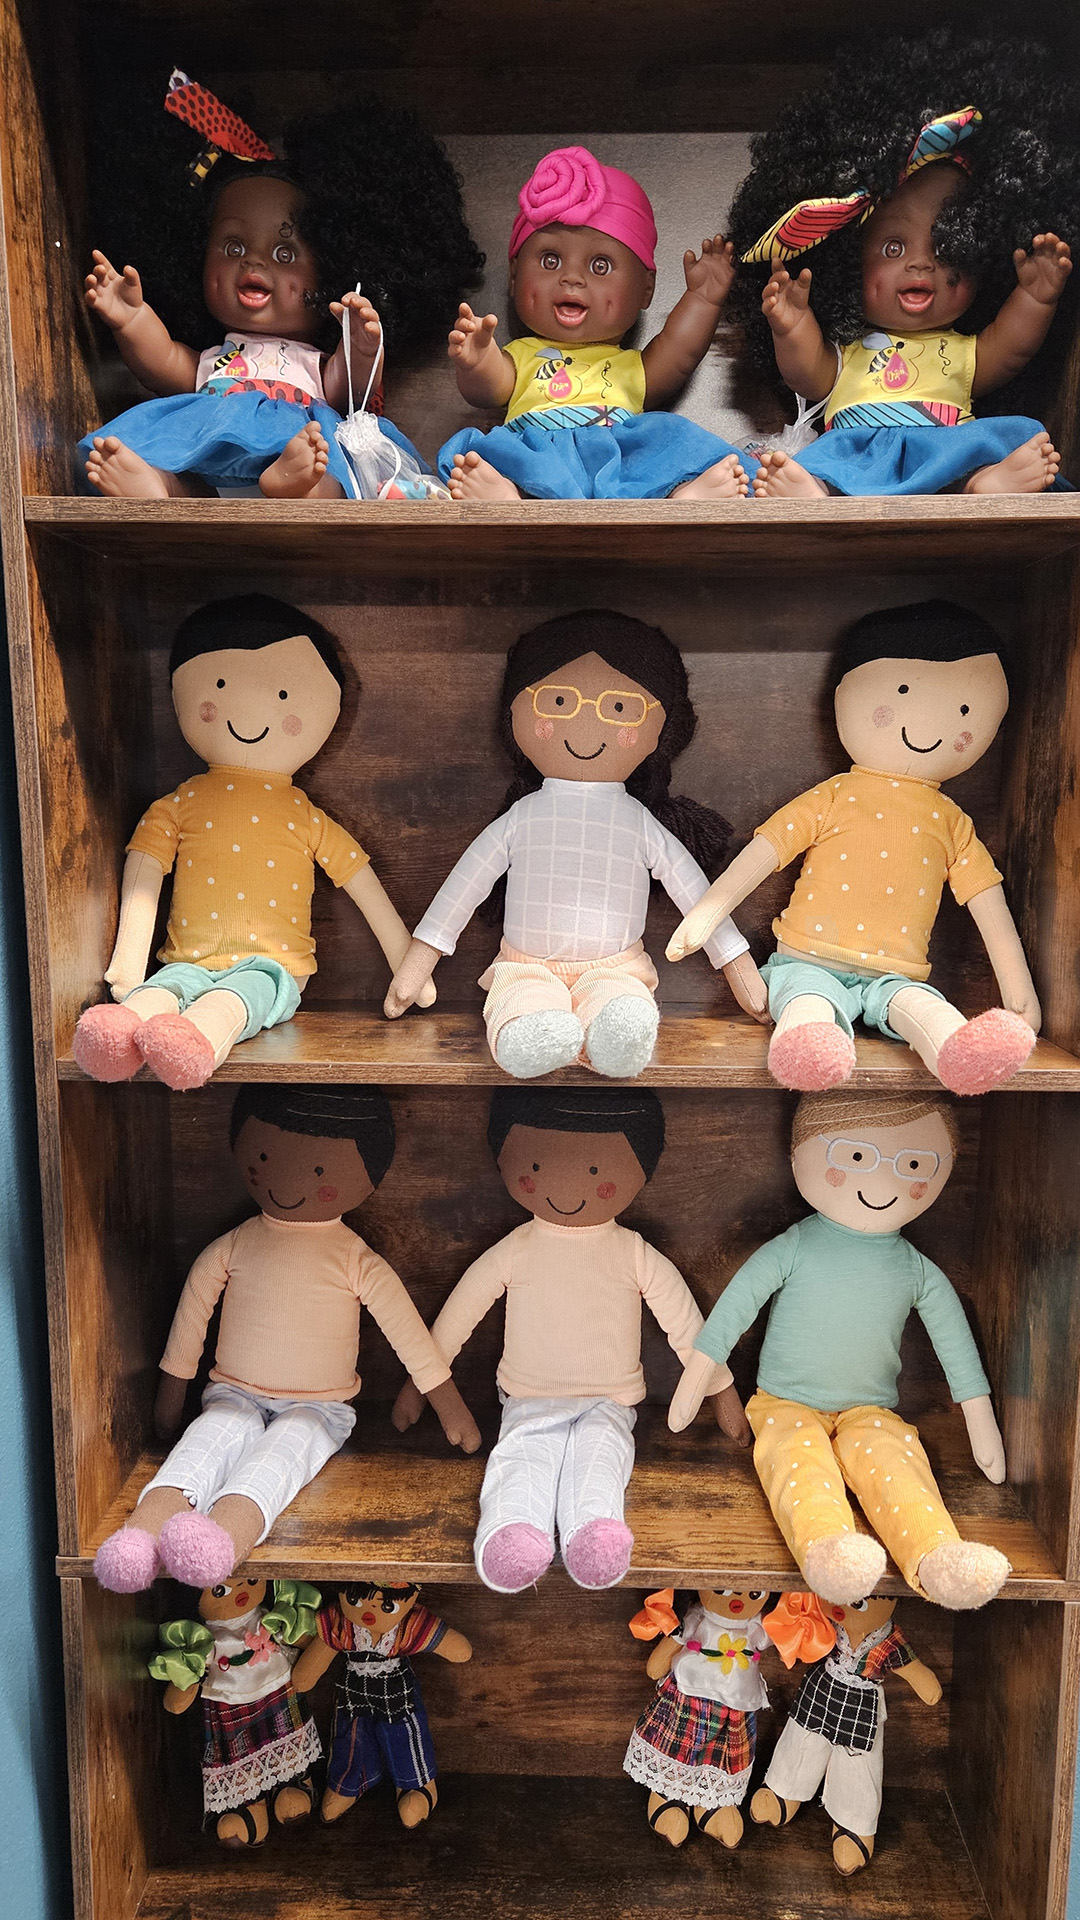 Different types of racially diverse cloth and plastic dolls sit on four shelves of a wood bookcase.